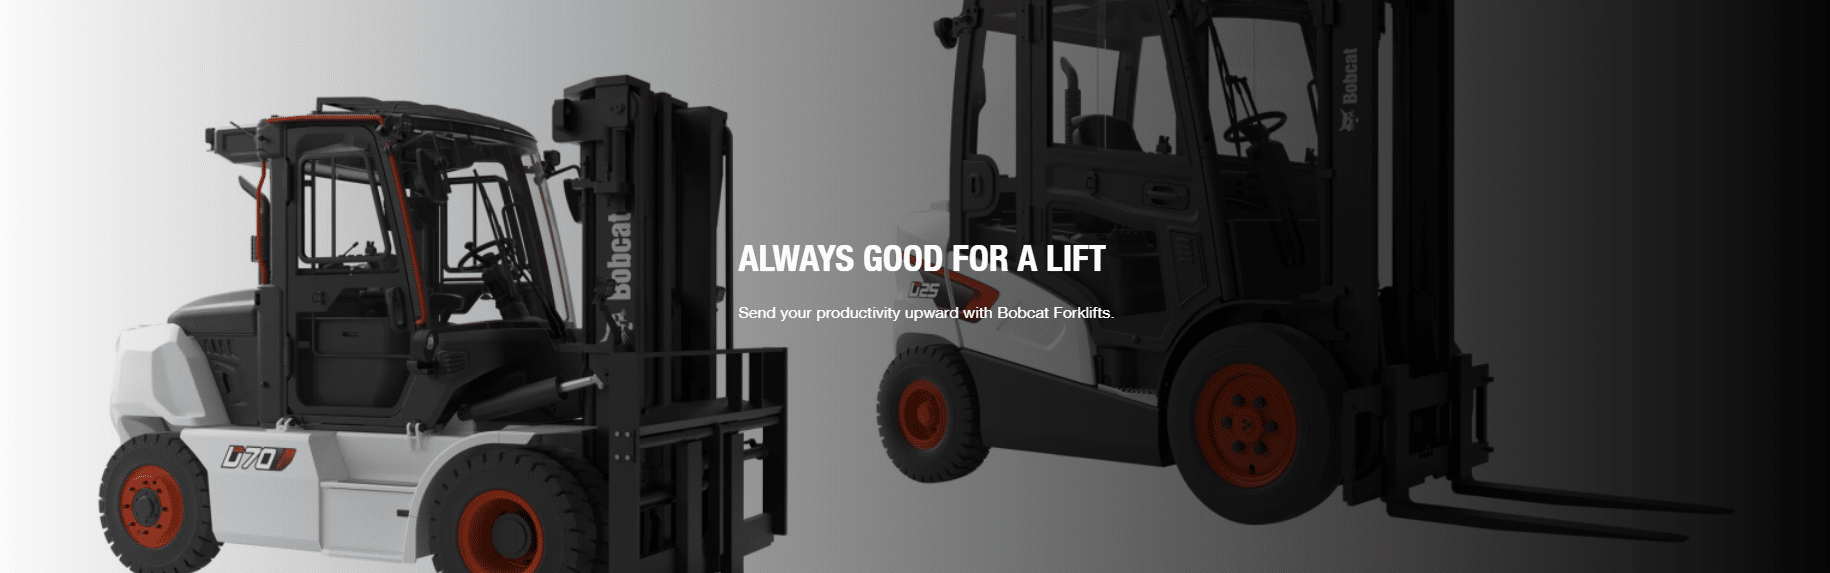 Featured image for “Doosan Bobcat Announces Global Brand Strategy; Forklifts Transition to Bobcat Brand”